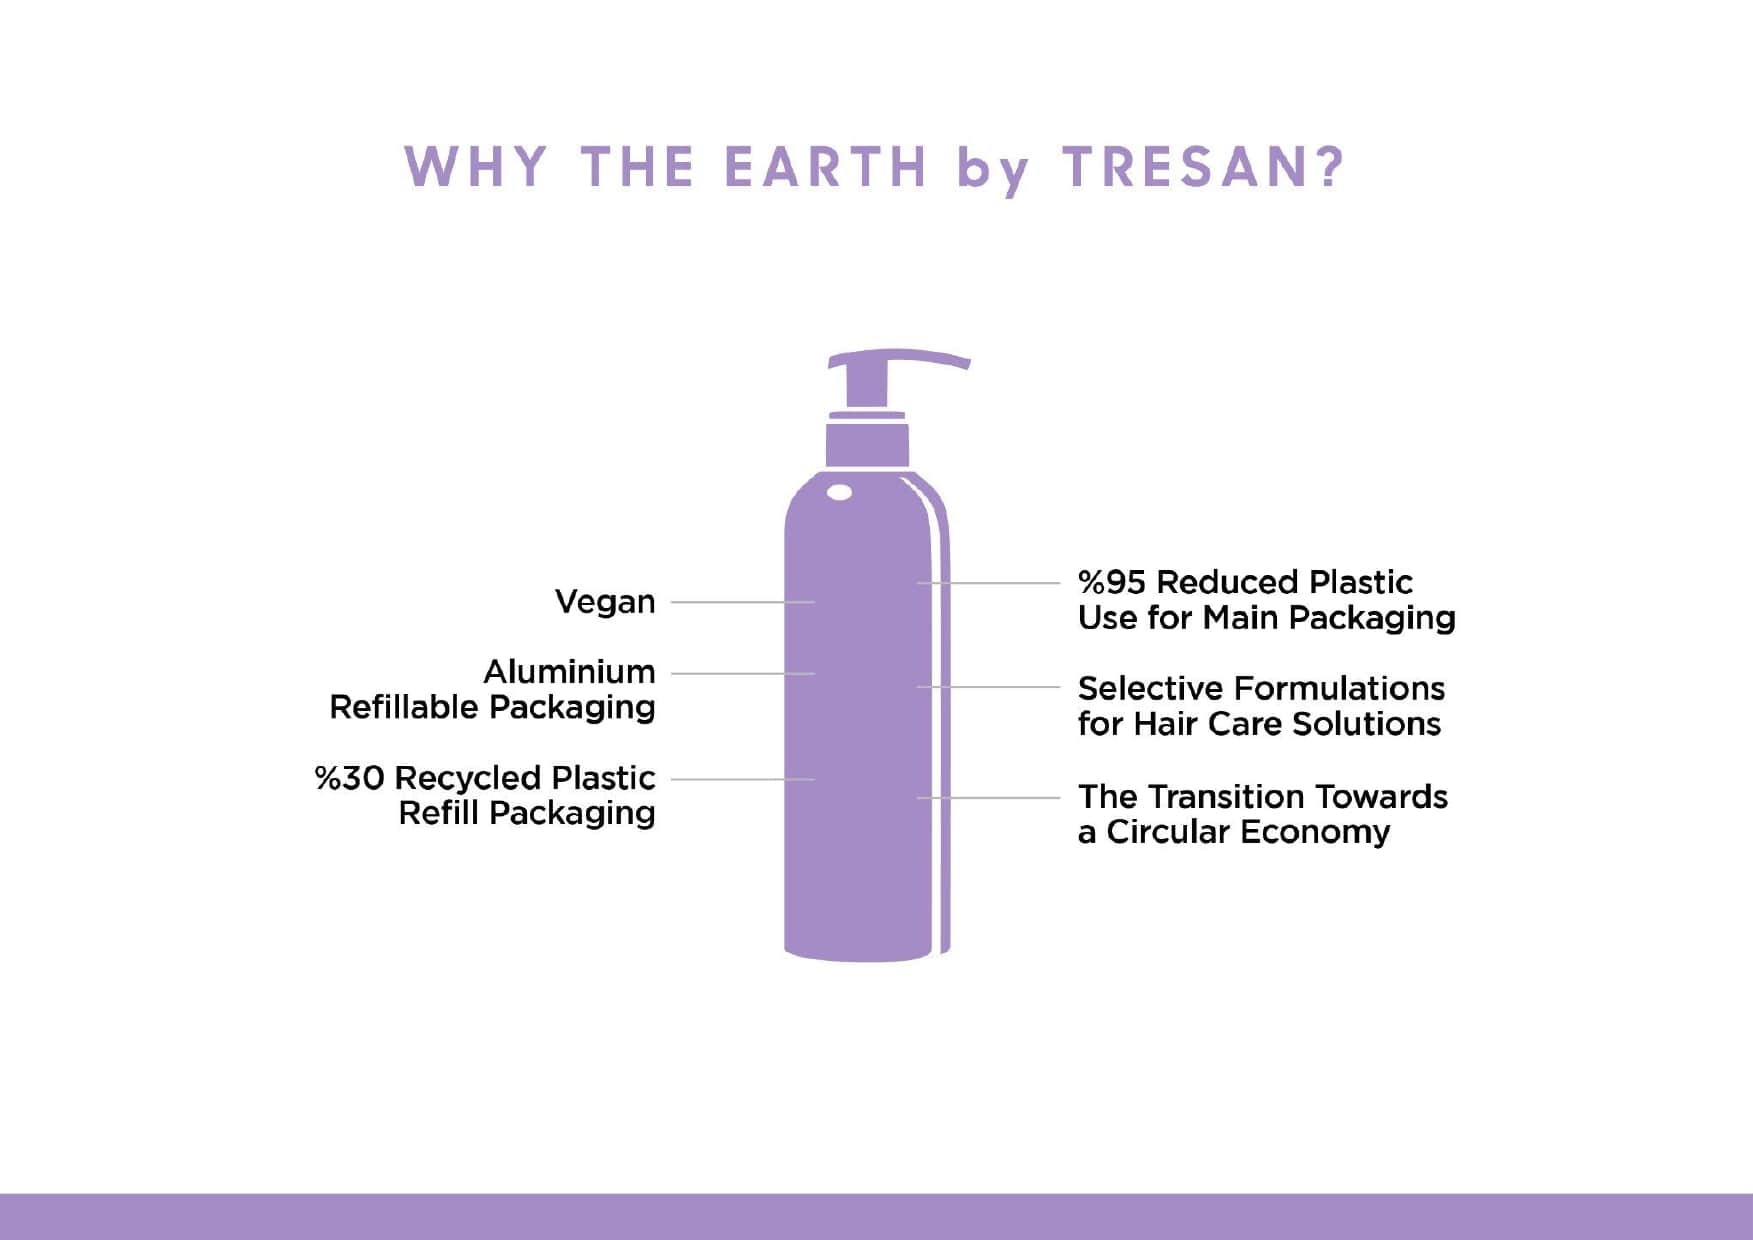 The Earth by Tresan Presentation 2022_page-0003-min